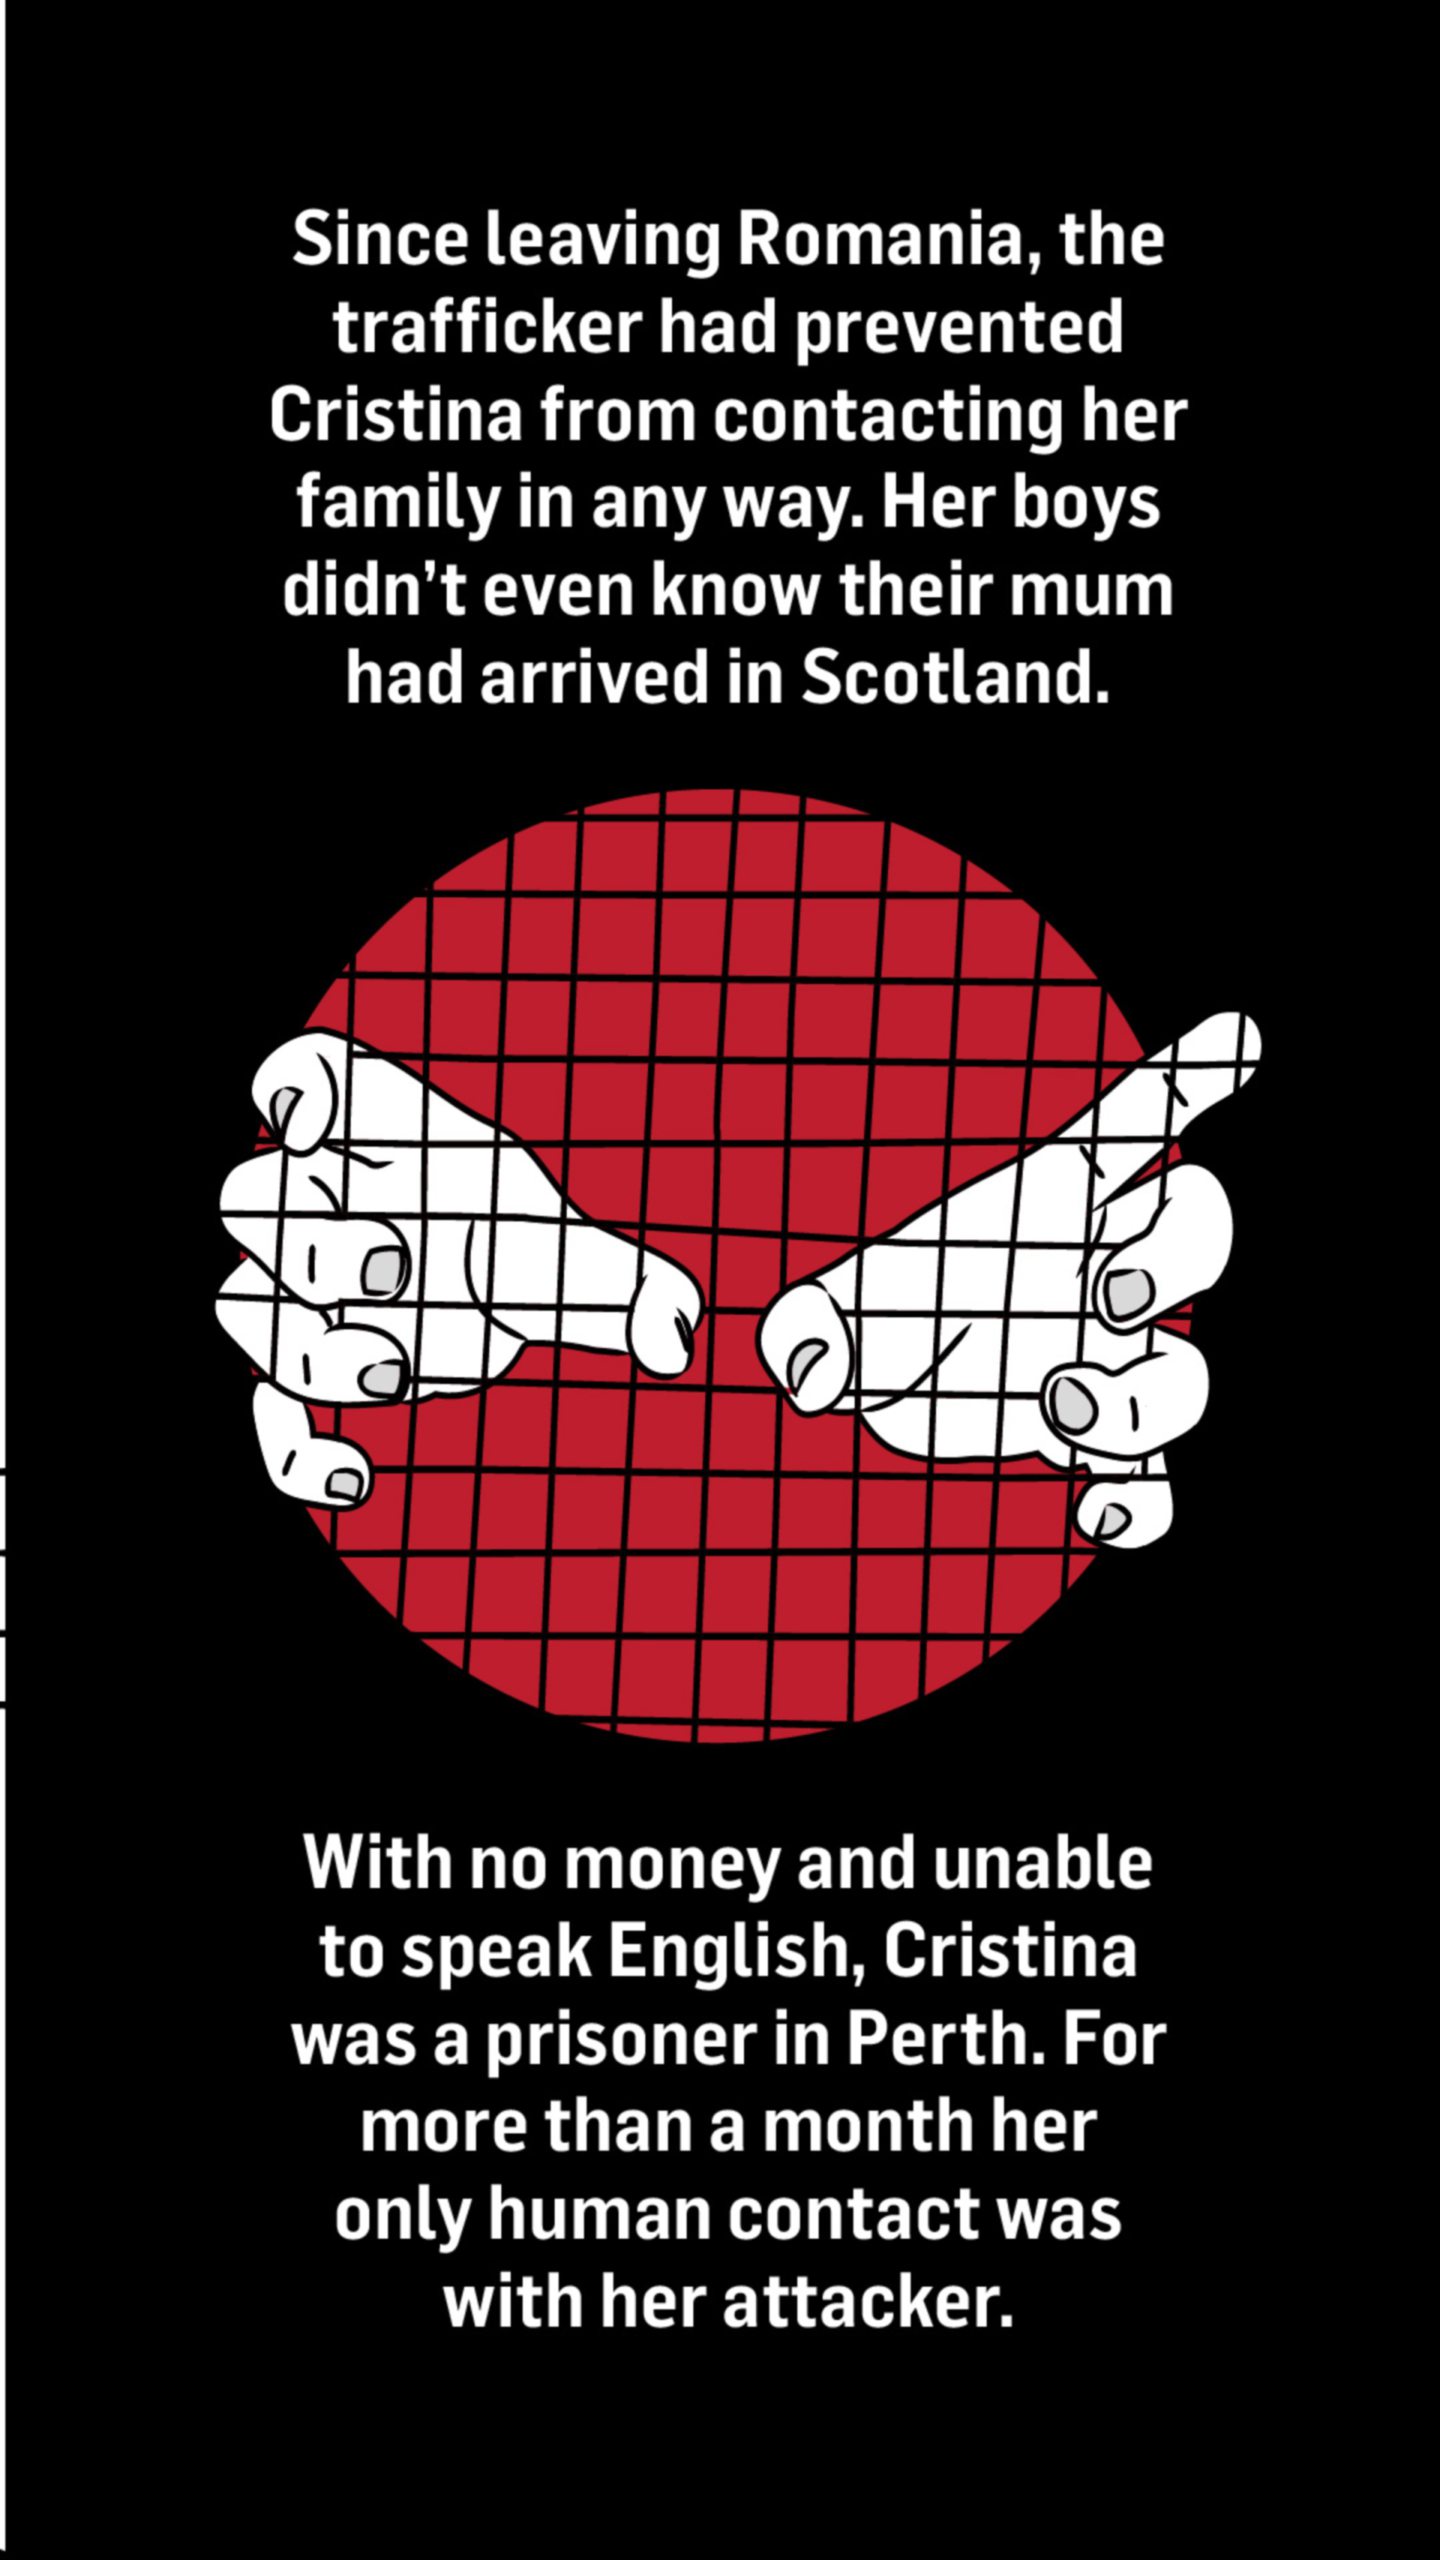 An illustration of a pair of hands reaching out of a cage. Words with the image read: Since leaving Romania, the trafficker had prevented Cristina from contacting her family in any way.

Her boys didn't even know their mum had arrived in Scotland.

With no money and unable to speak English, Cristina was a prisoner in Perth. For more than a month her only human contact was with her attacker.